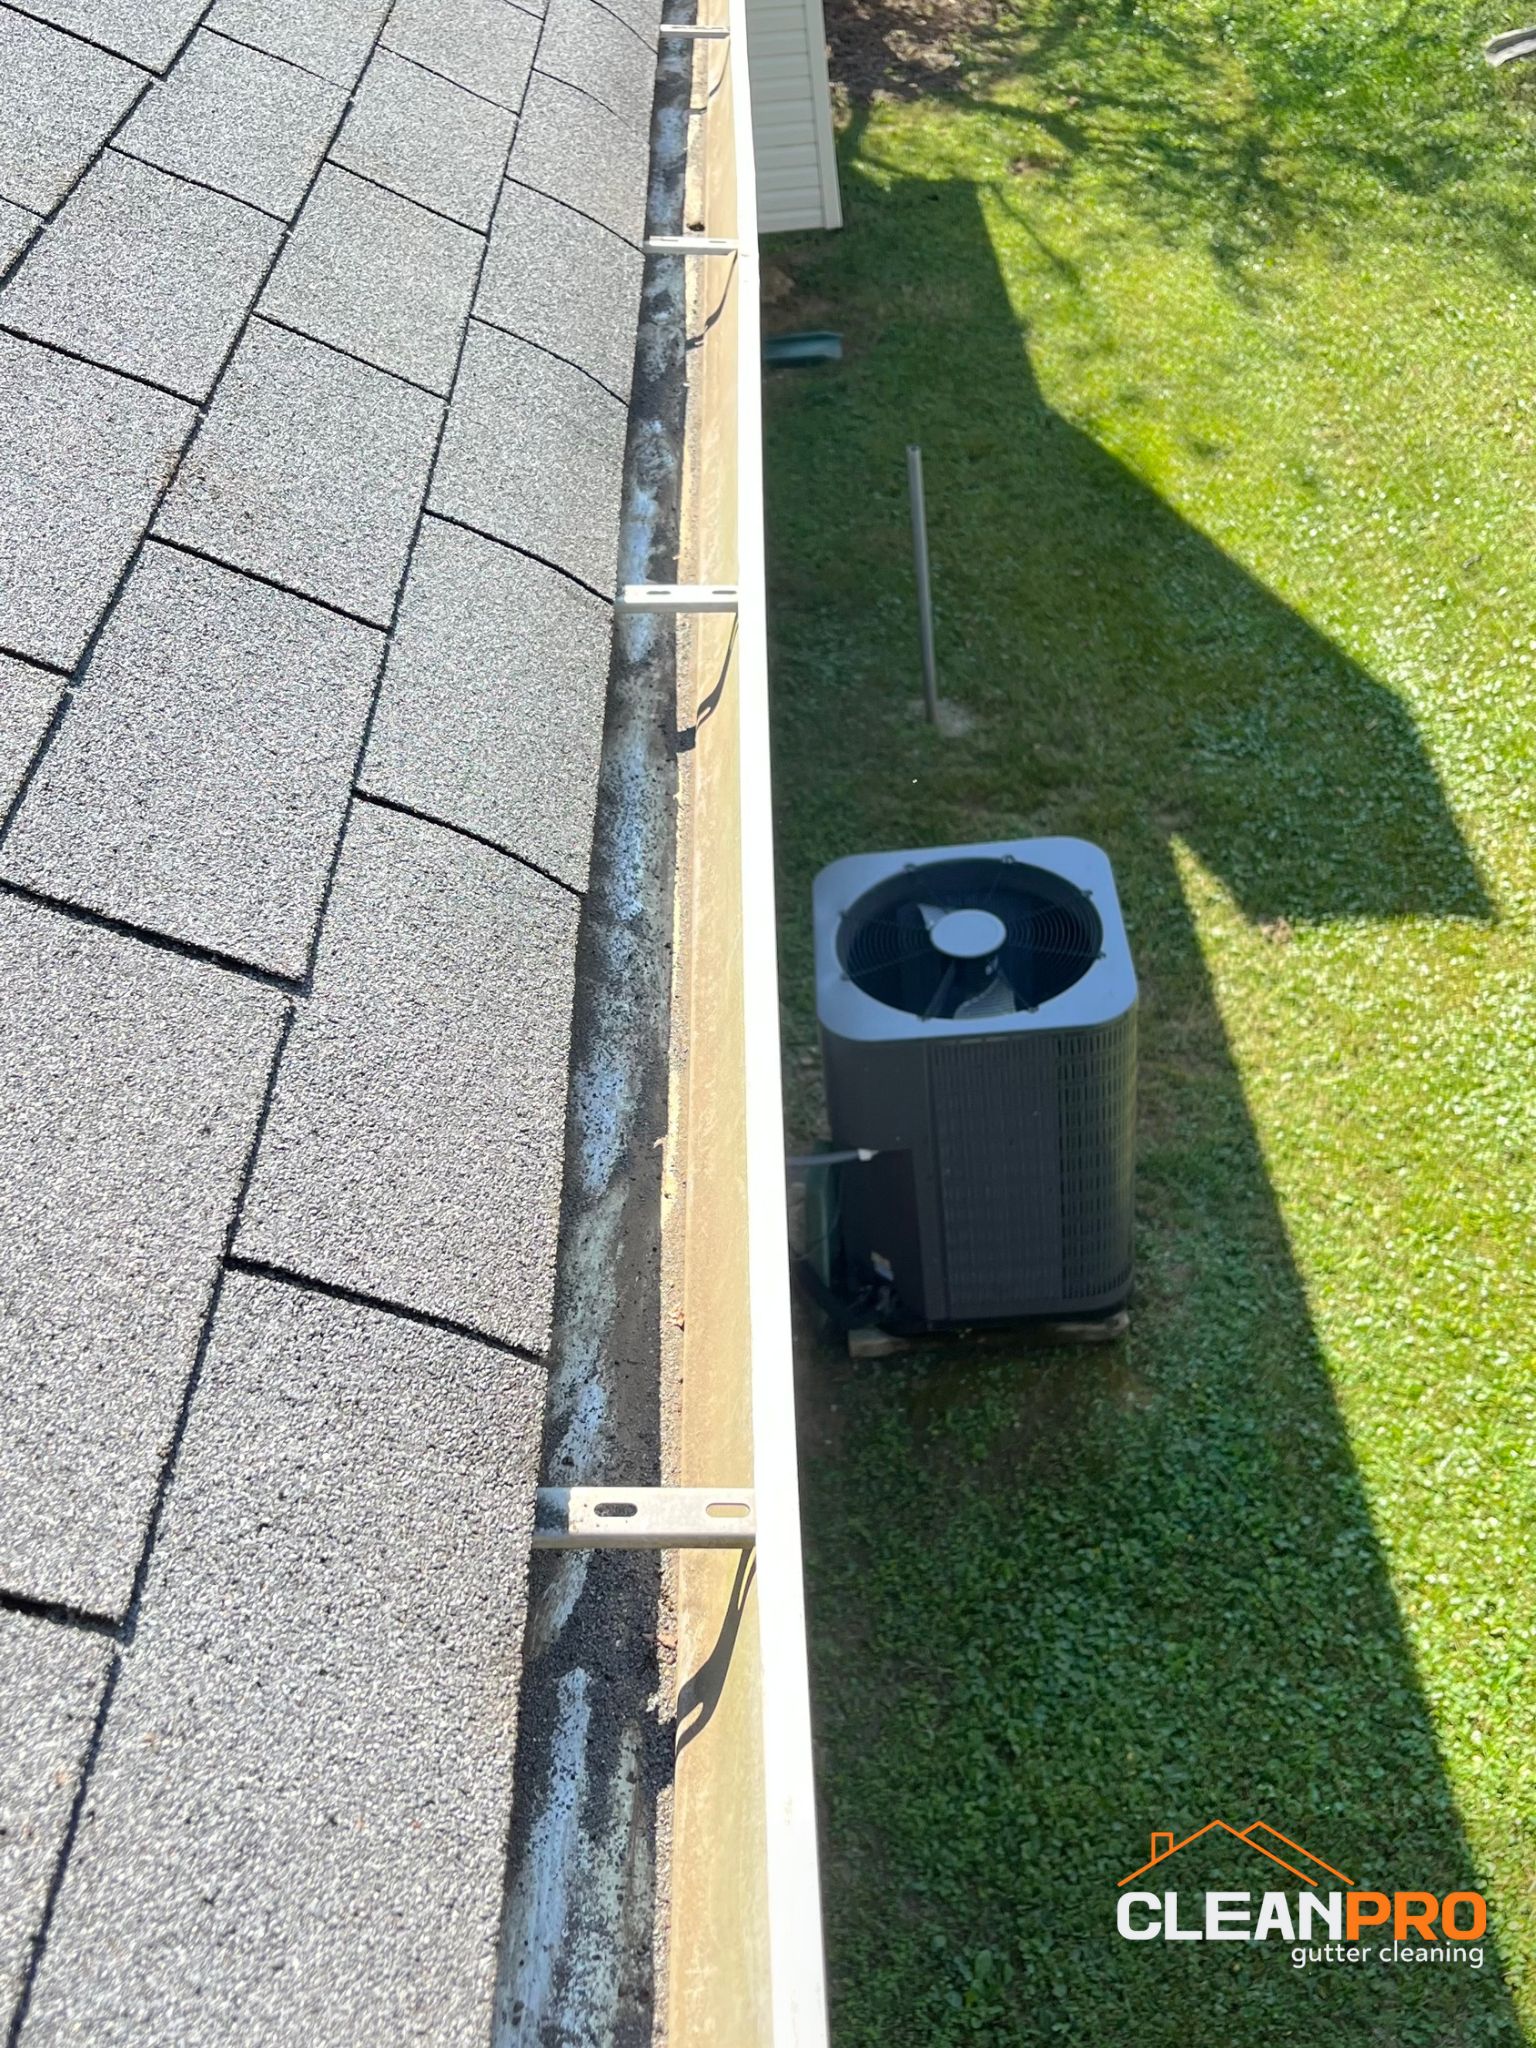 Quality Gutter Cleaning in Dallas TX